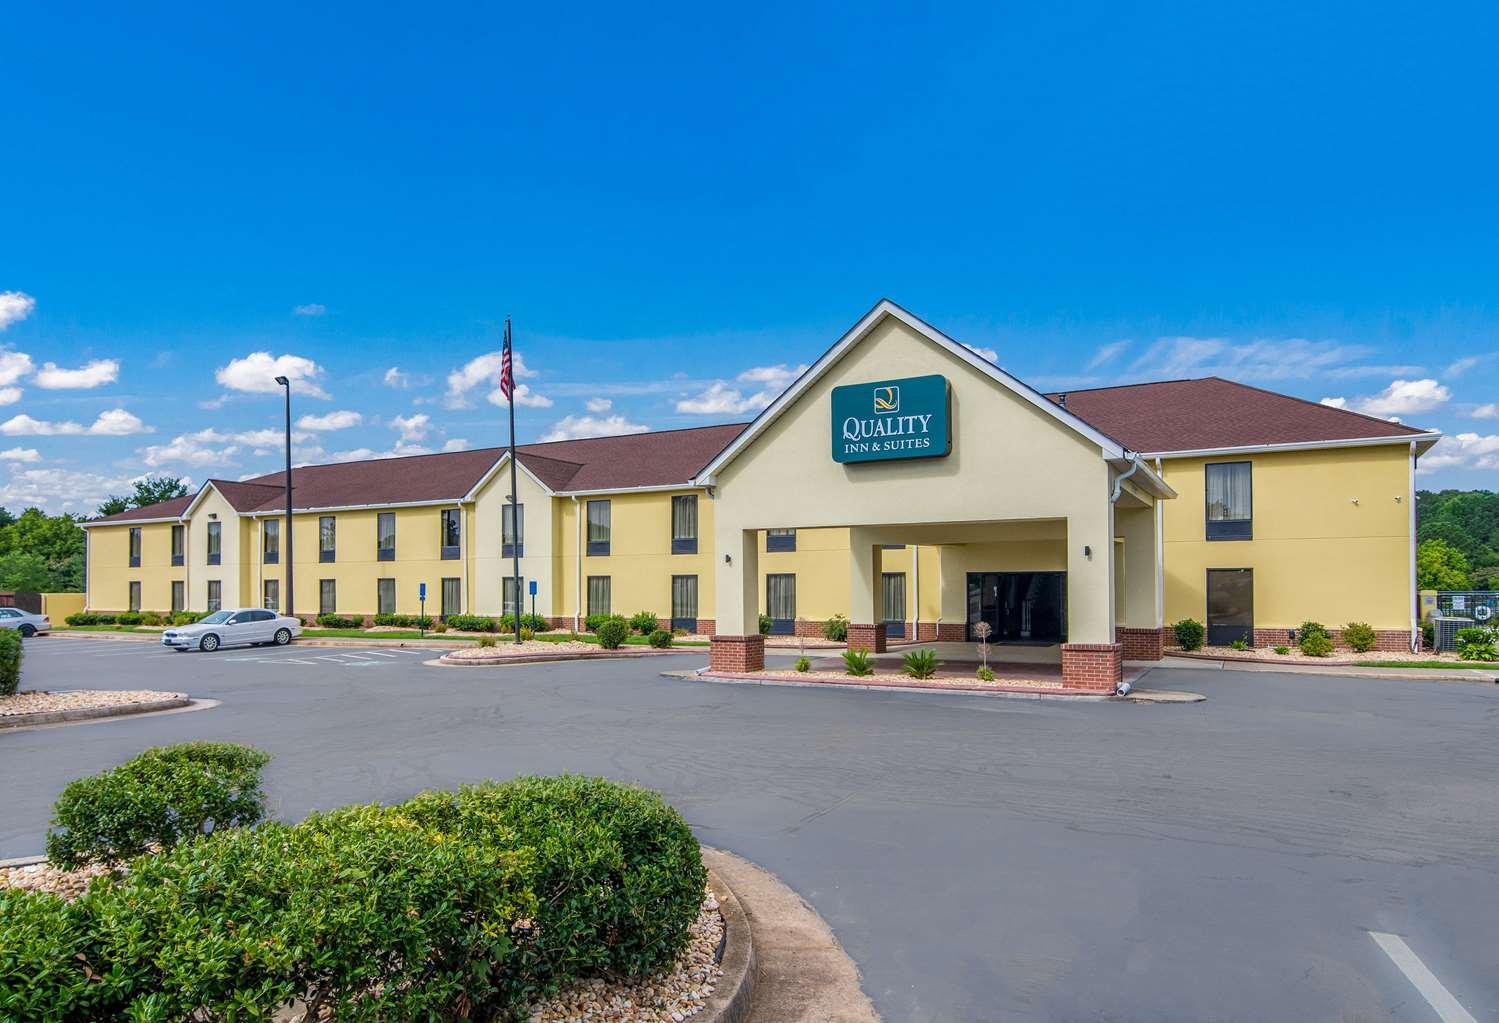 Quality Inn and Suites in Canton, GA